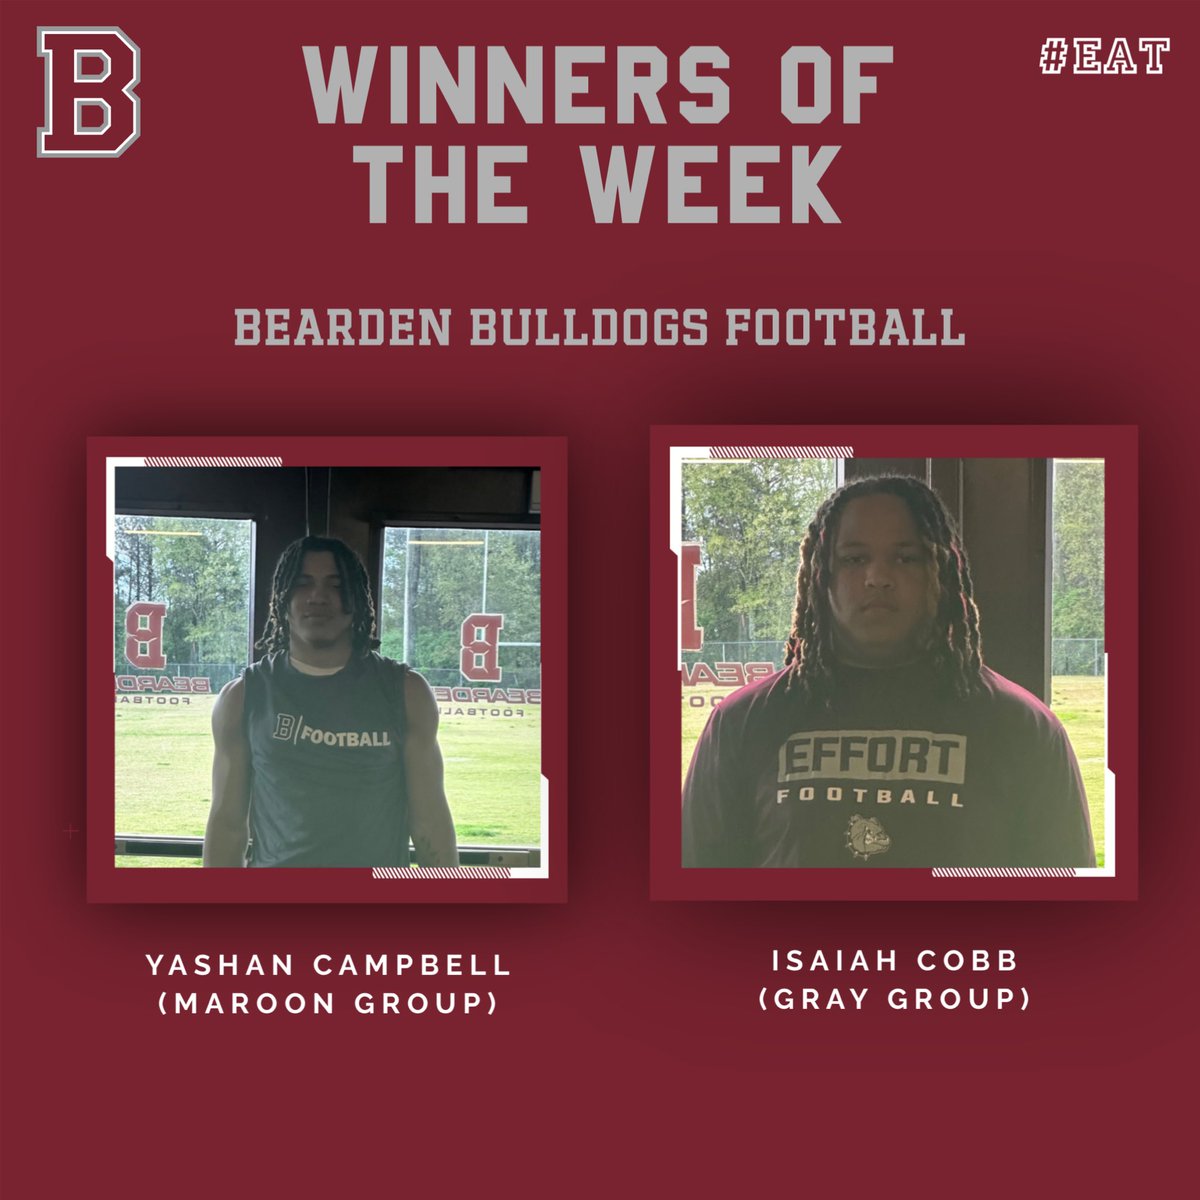 Congrats to our “Winners of the Week”. #Dawgs